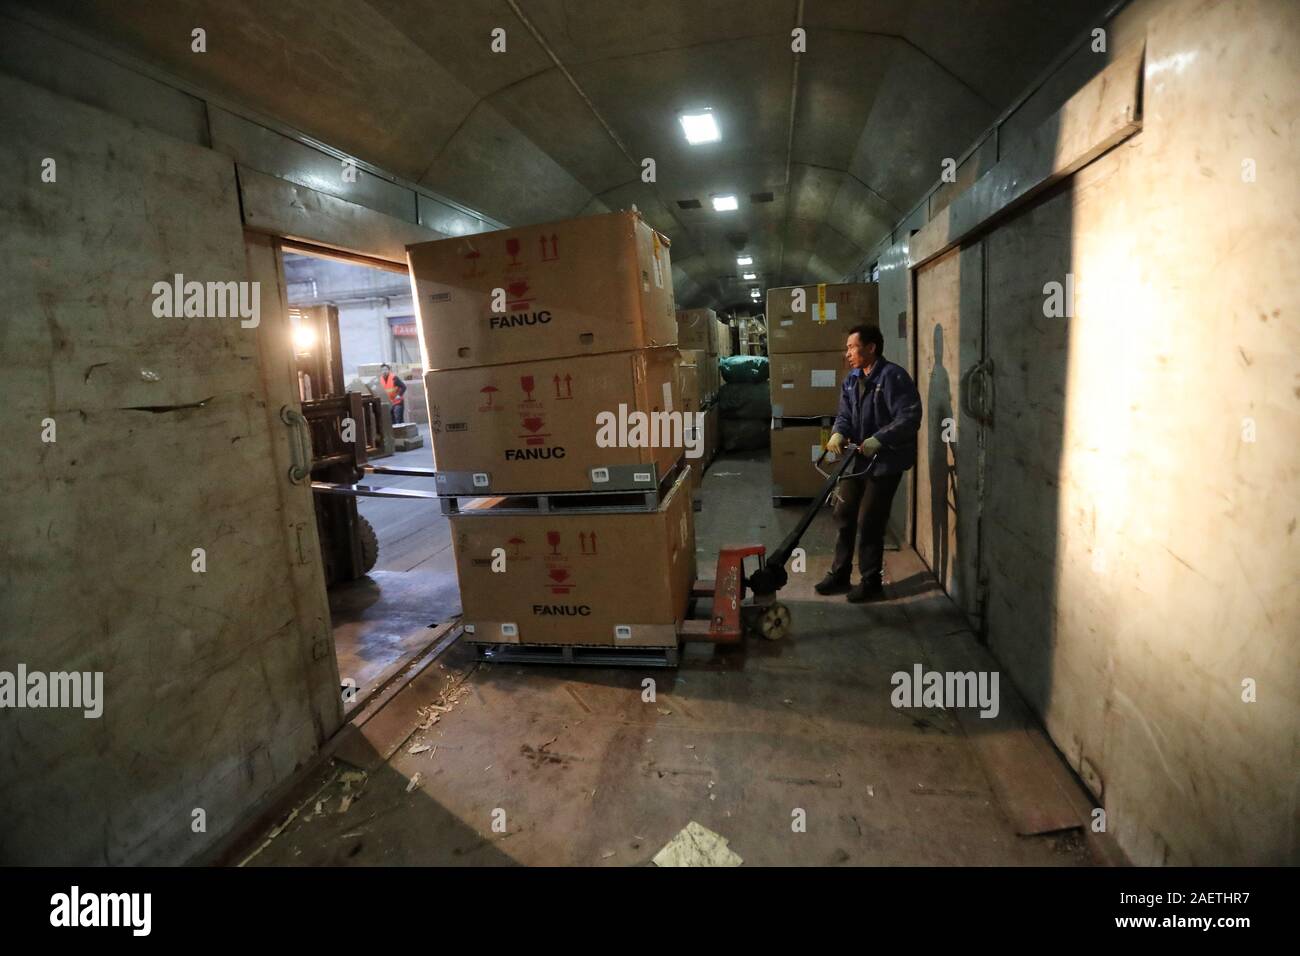 Staff load package on a coach prepared for e-commerce companies to deliver goods in Beijing, China, 8 November 2019.   Special trains for e-commerce c Stock Photo